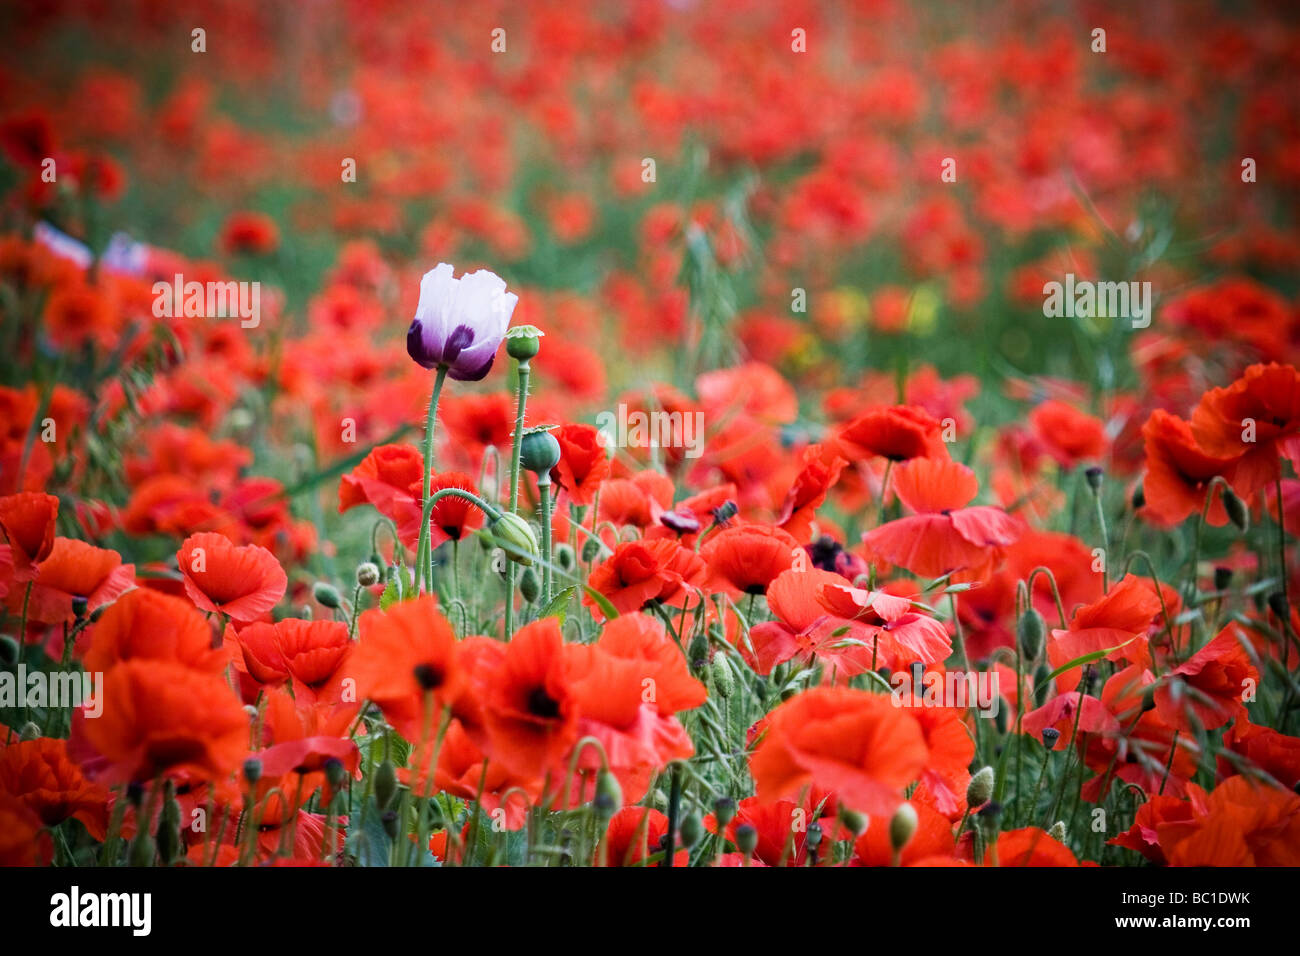 Purple and White poppy amongst a field of red poppies Stock Photo - Alamy